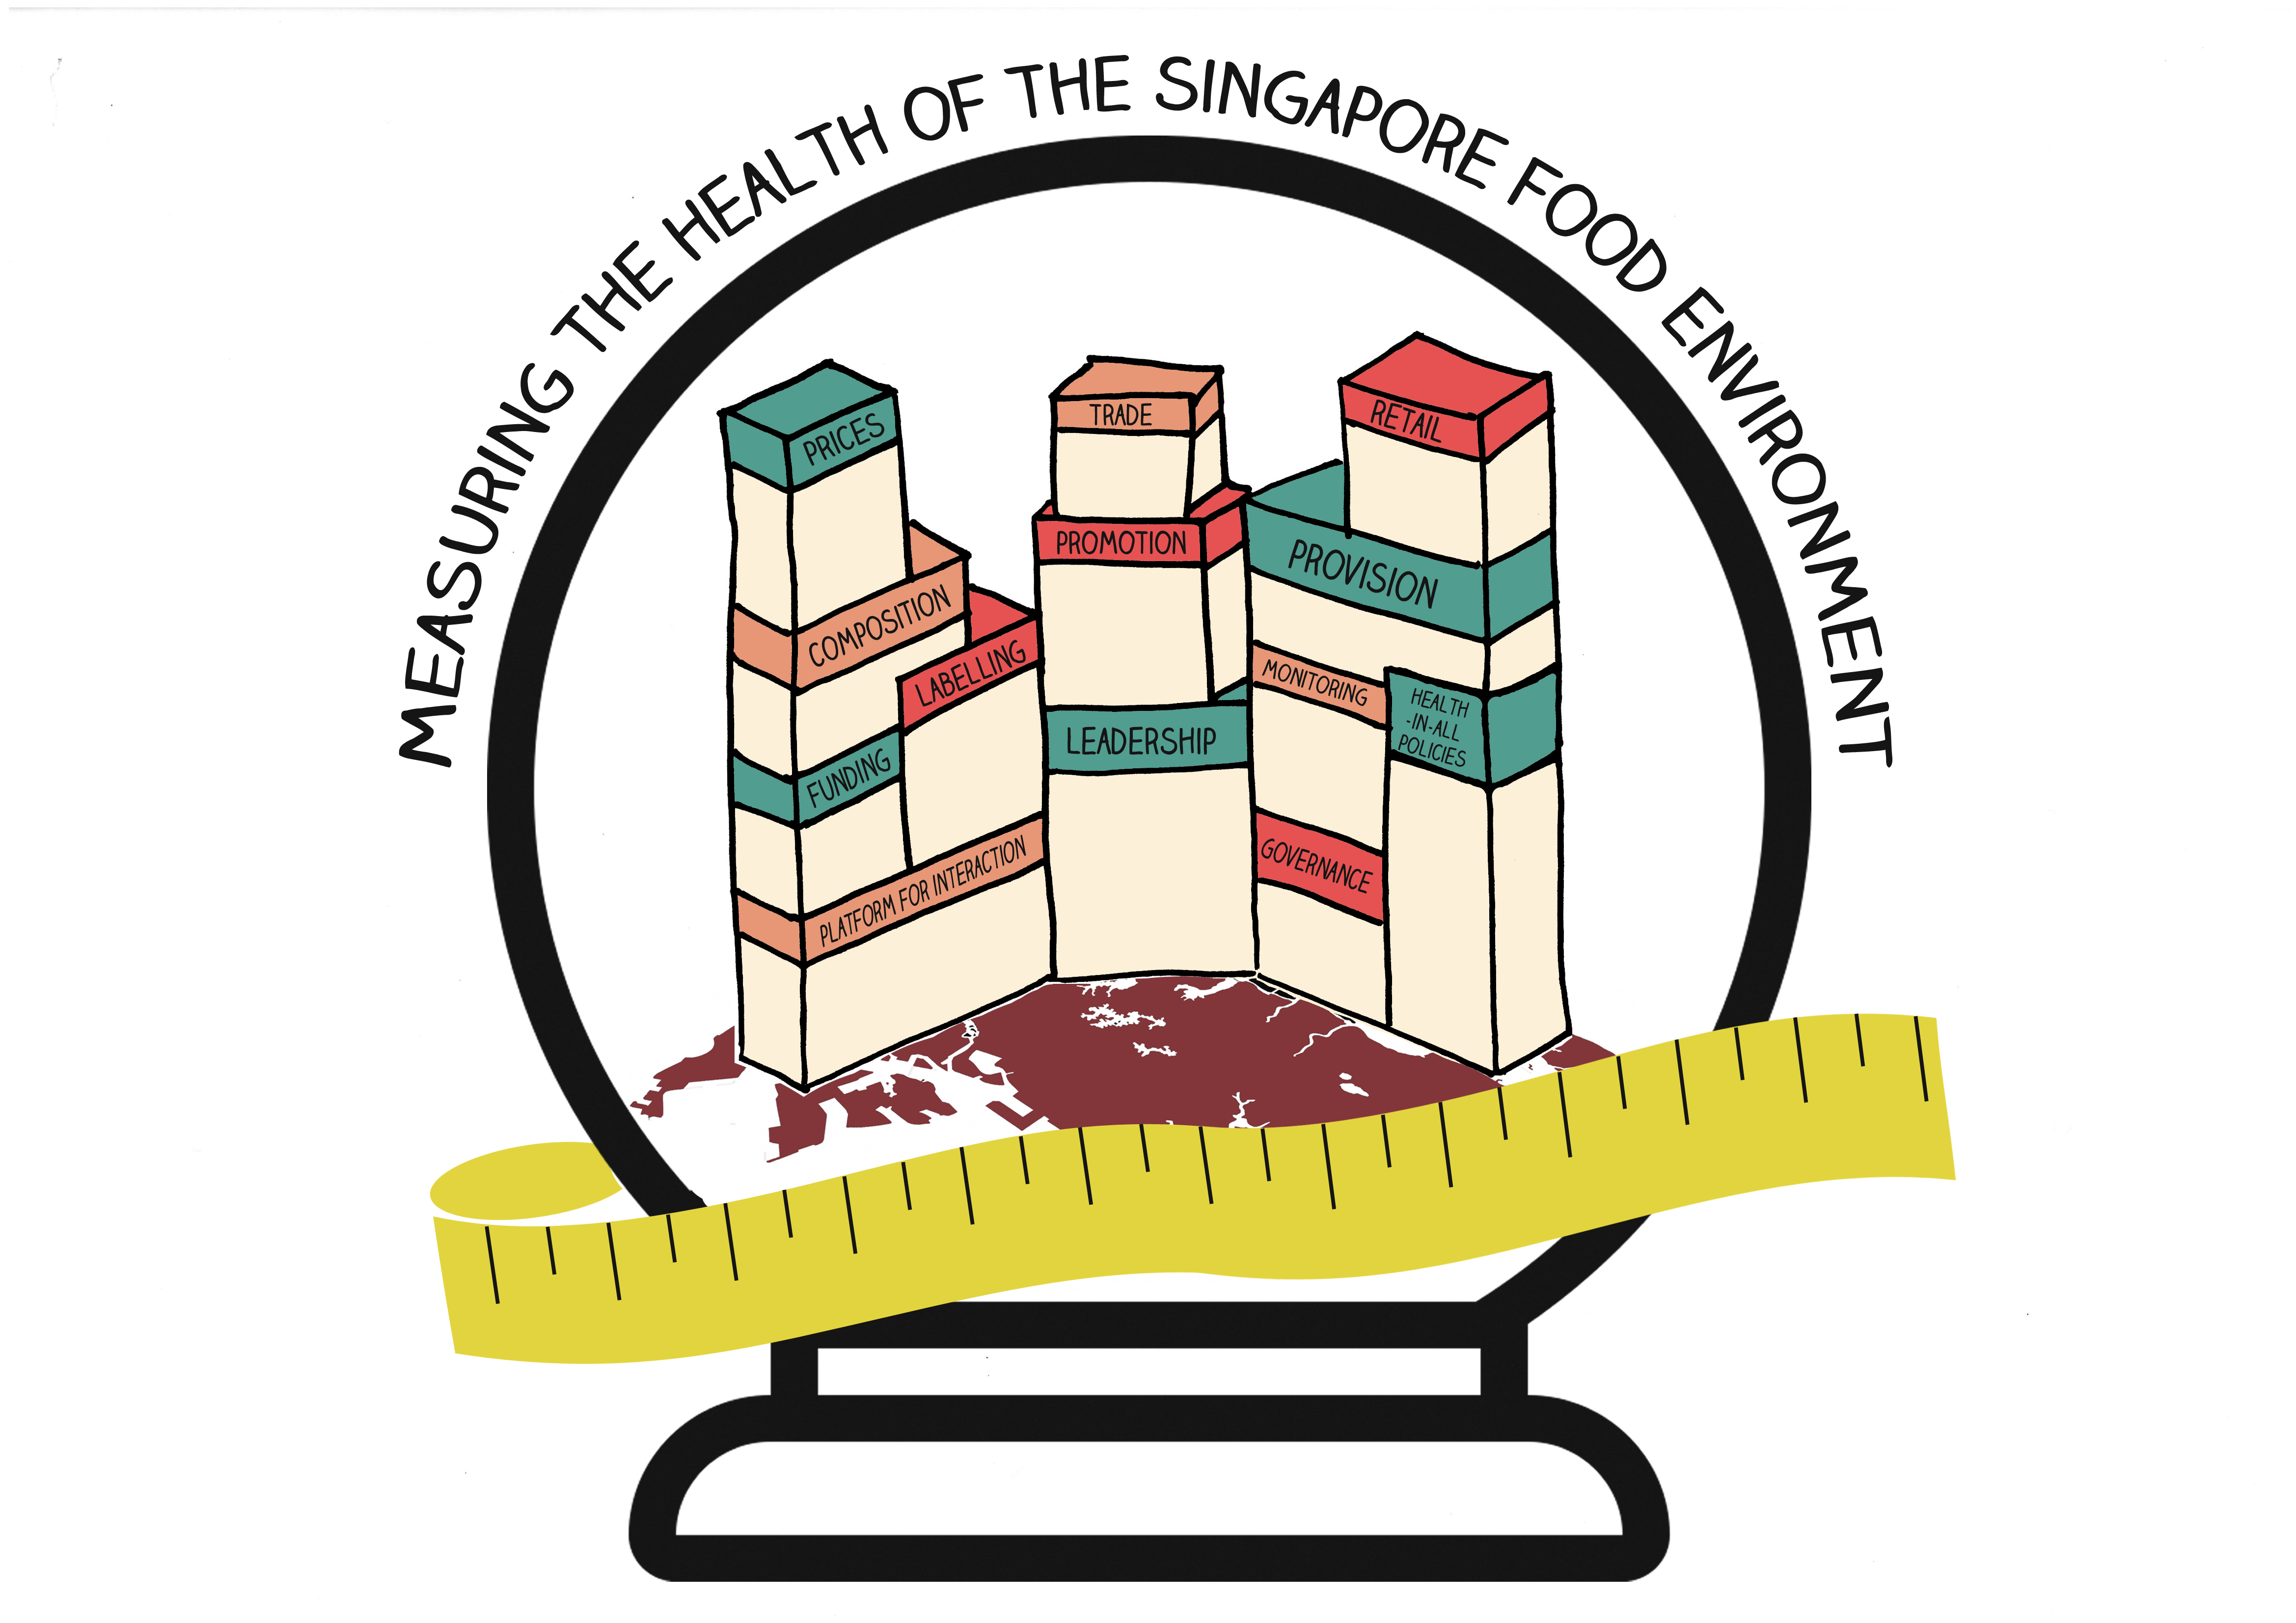 Measuring the health of the Singapore food environment